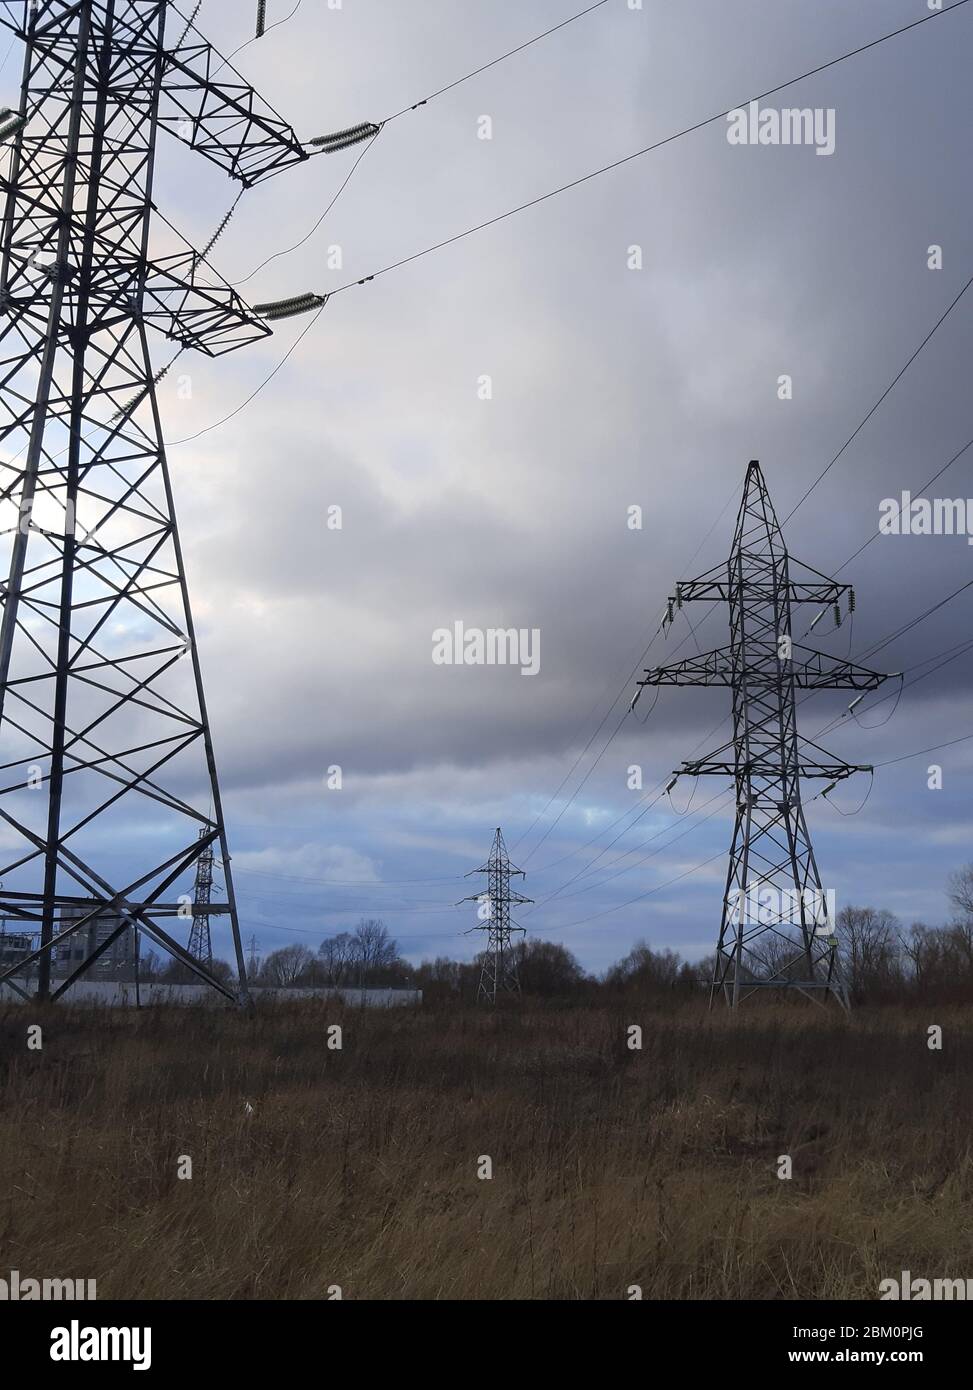 Metal pylons of a power line against a disturbing cloudy sky on the outskirts of a city. High voltage towers. Desolate landscape. Apocalypse concept Stock Photo